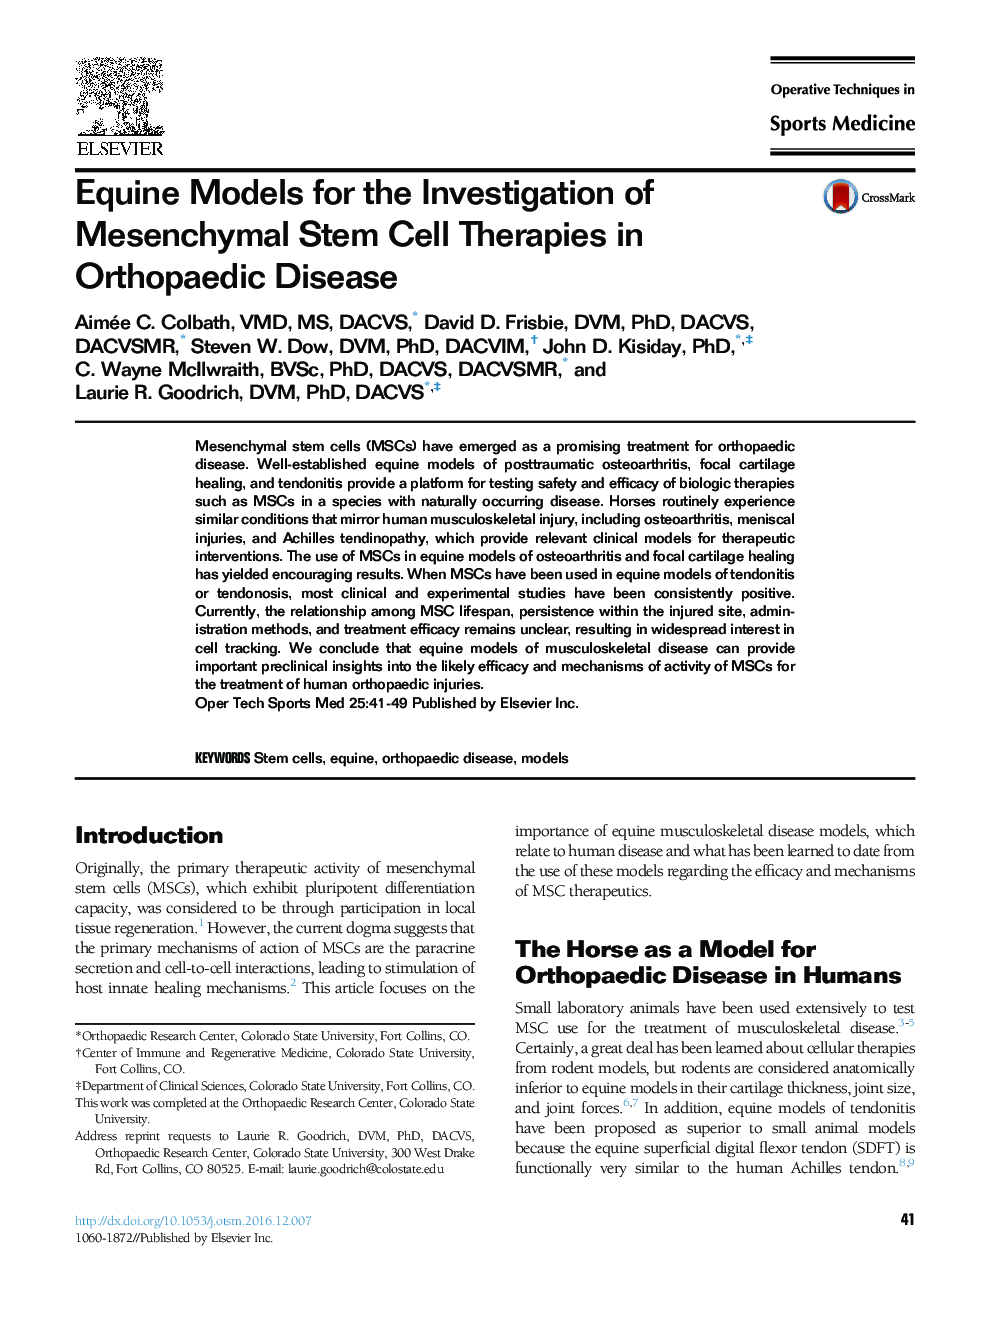 Equine Models for the Investigation of Mesenchymal Stem Cell Therapies in Orthopaedic Disease